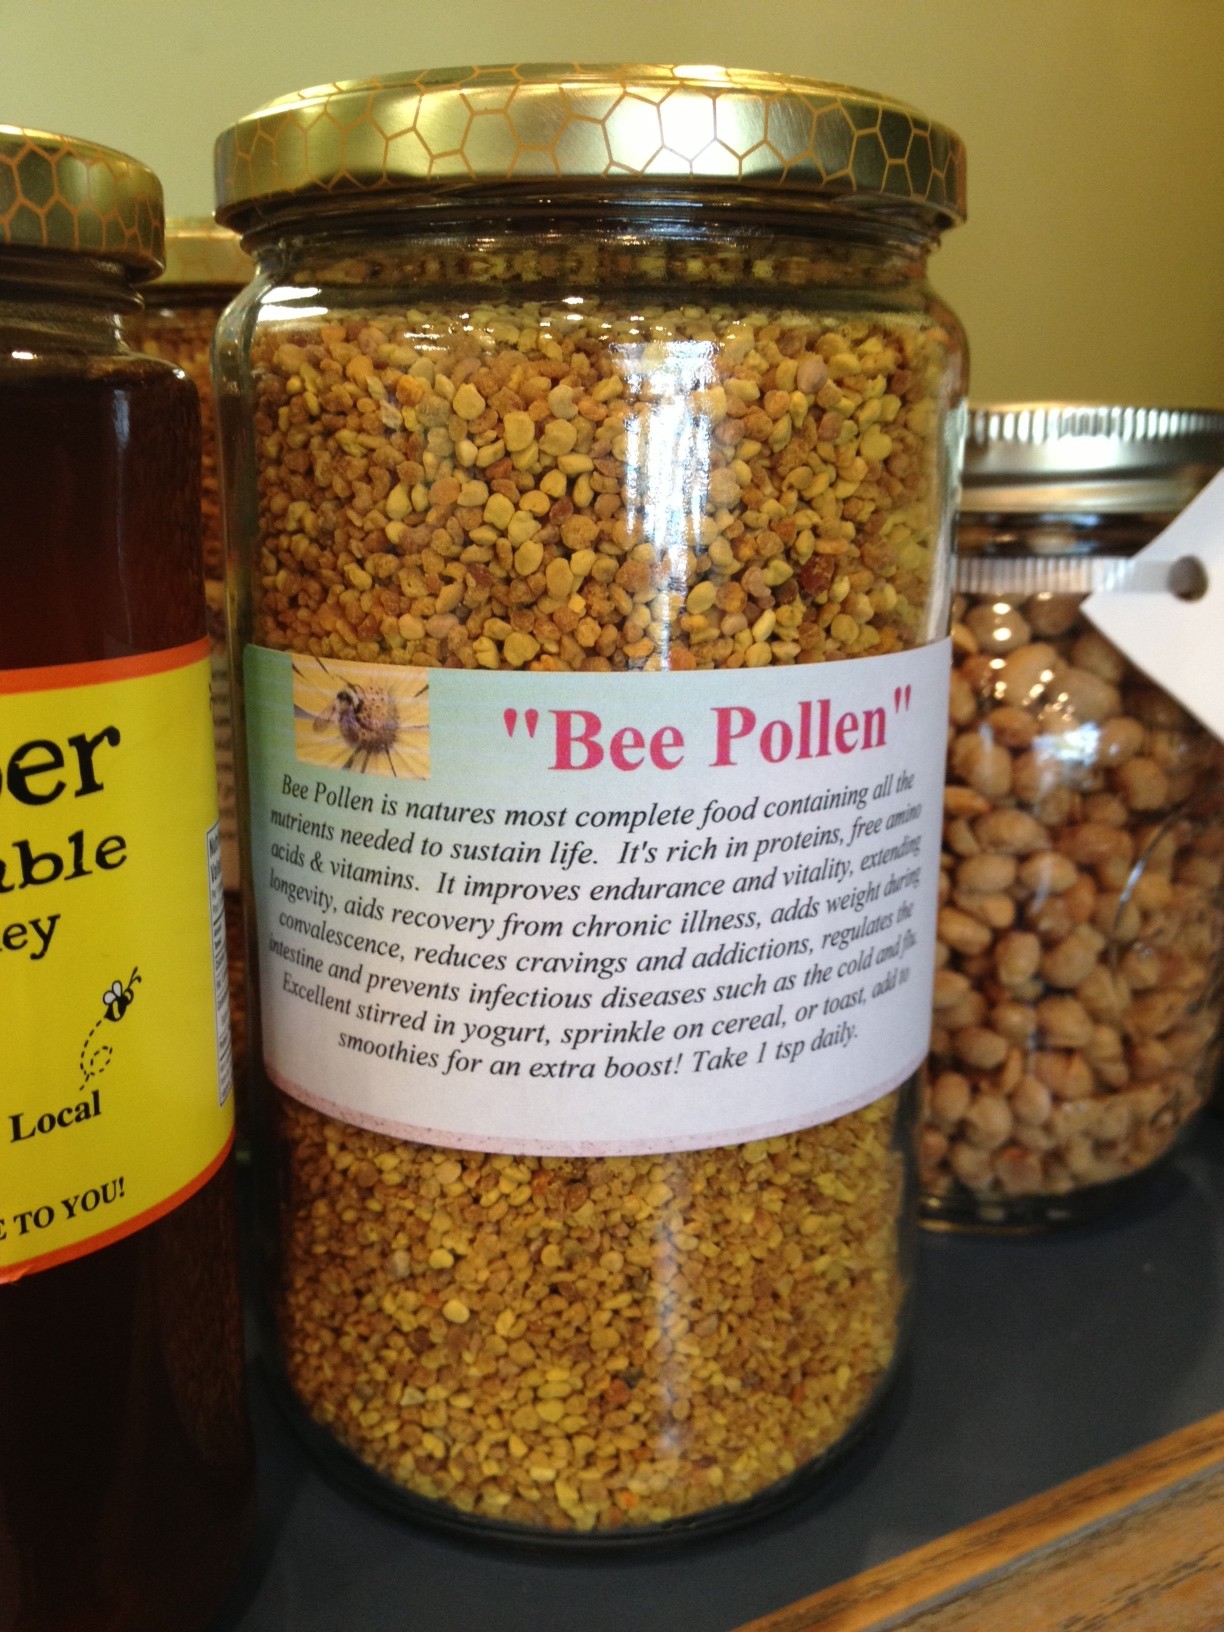 This is a jar of bee pollen I found for sale at The Lauriam Tea House in Bowmanville.  This jar is about $22.